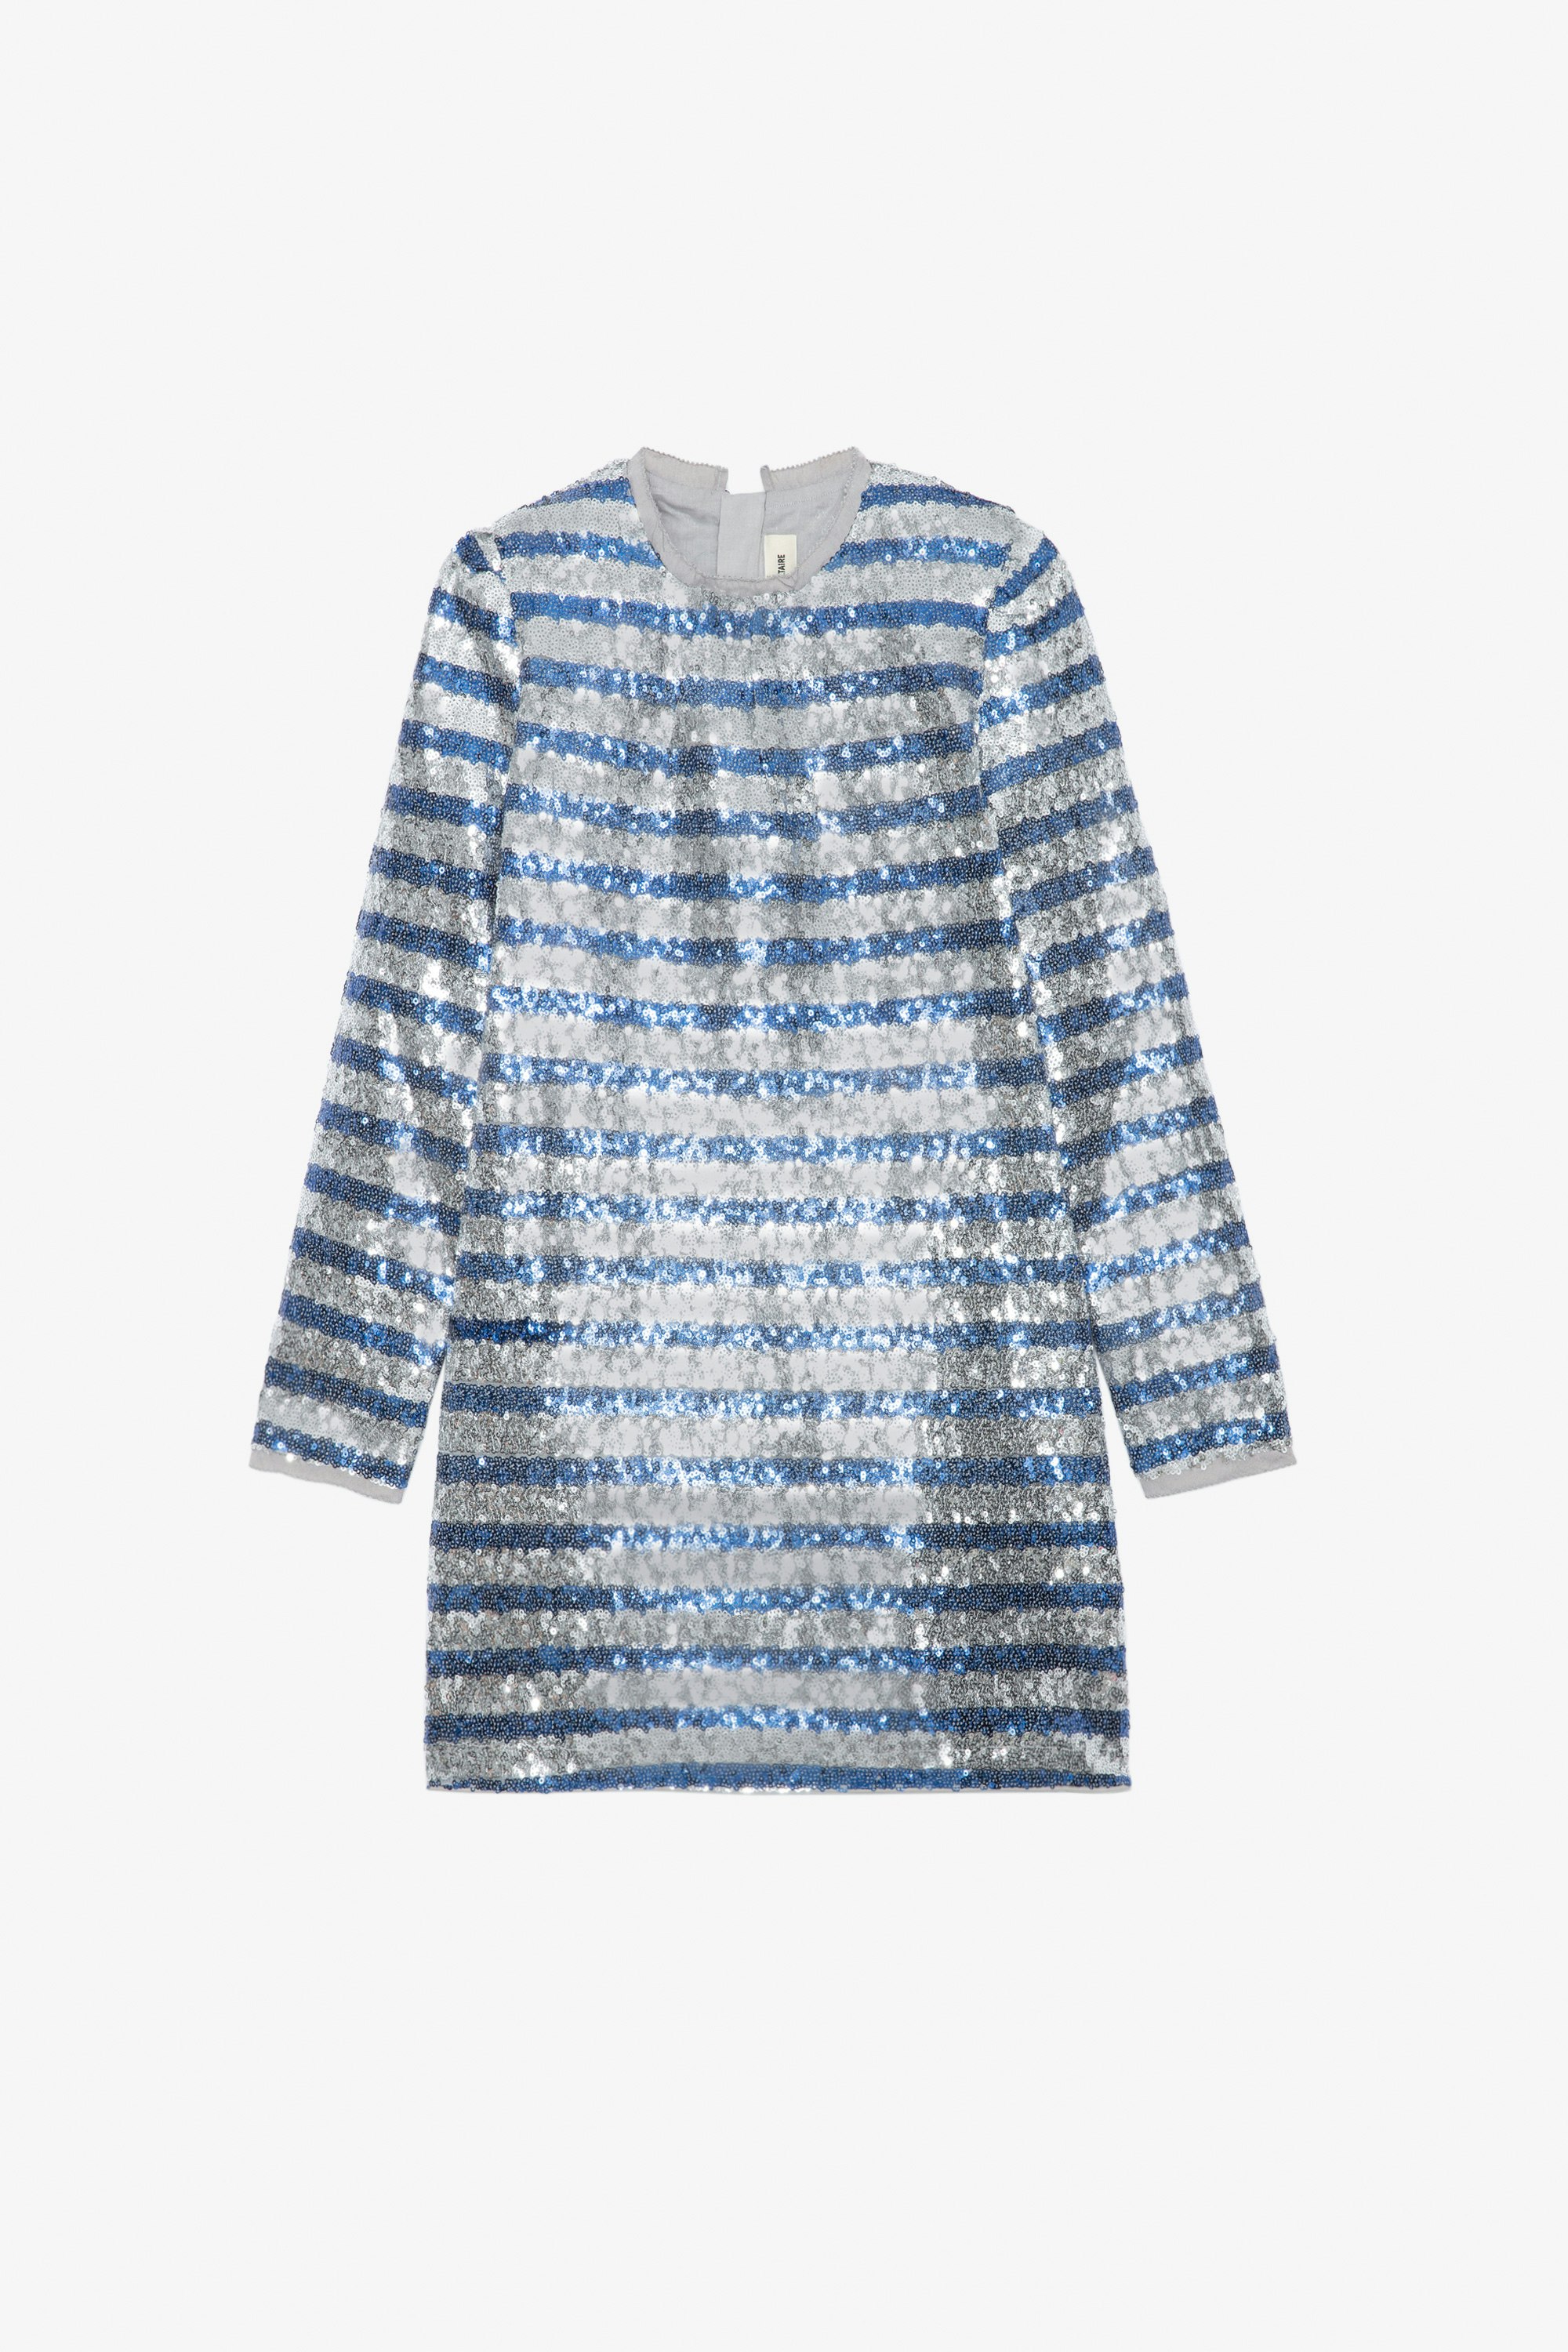 Sienna Girls’ Dress - Girls’ silver occasion dress with sequins and stripes.